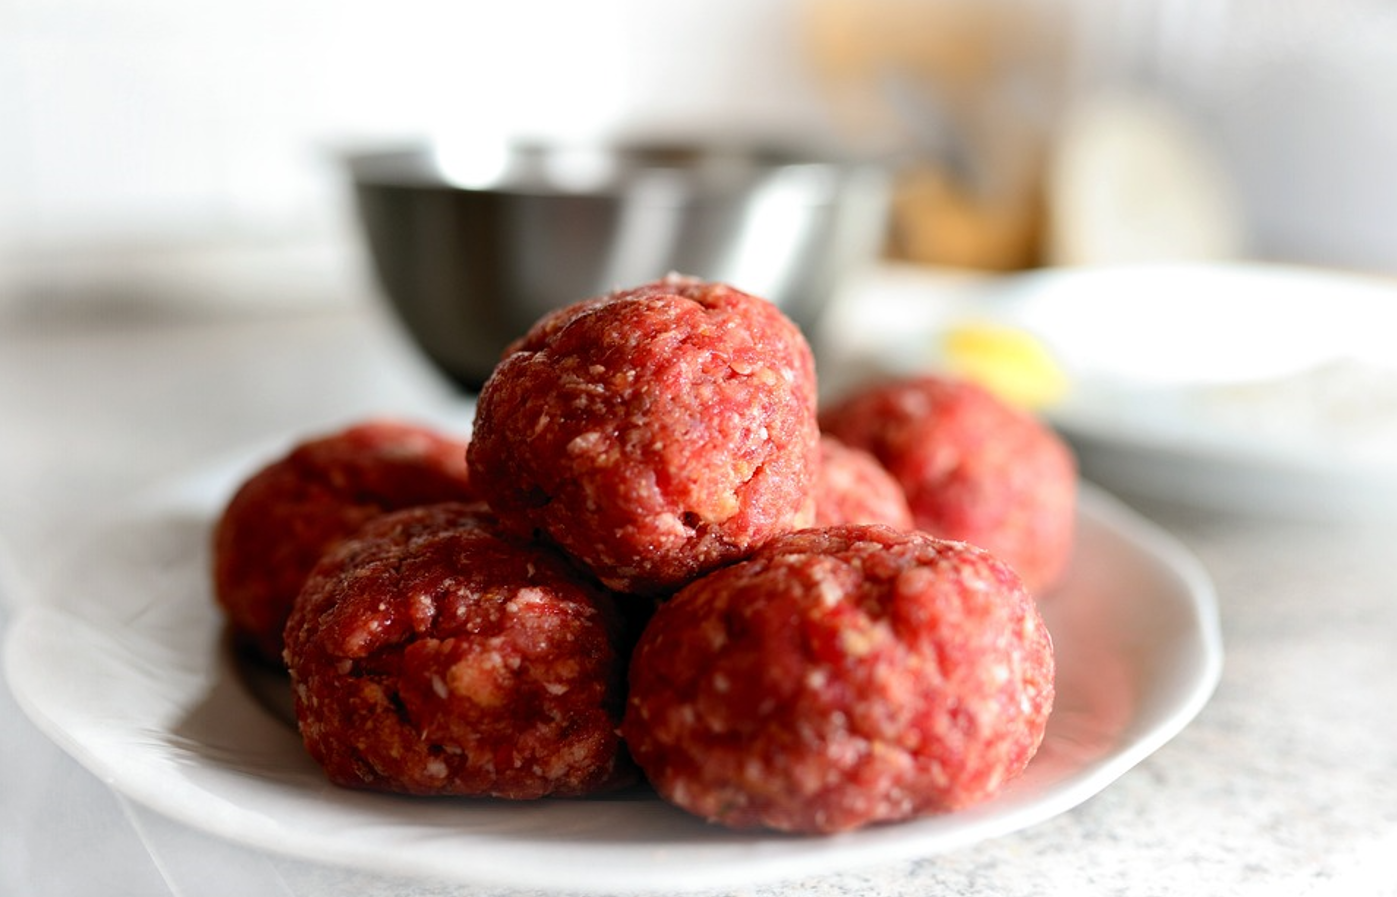 Meatballs for a hearty lunch: served with porridge, pasta or potatoes.